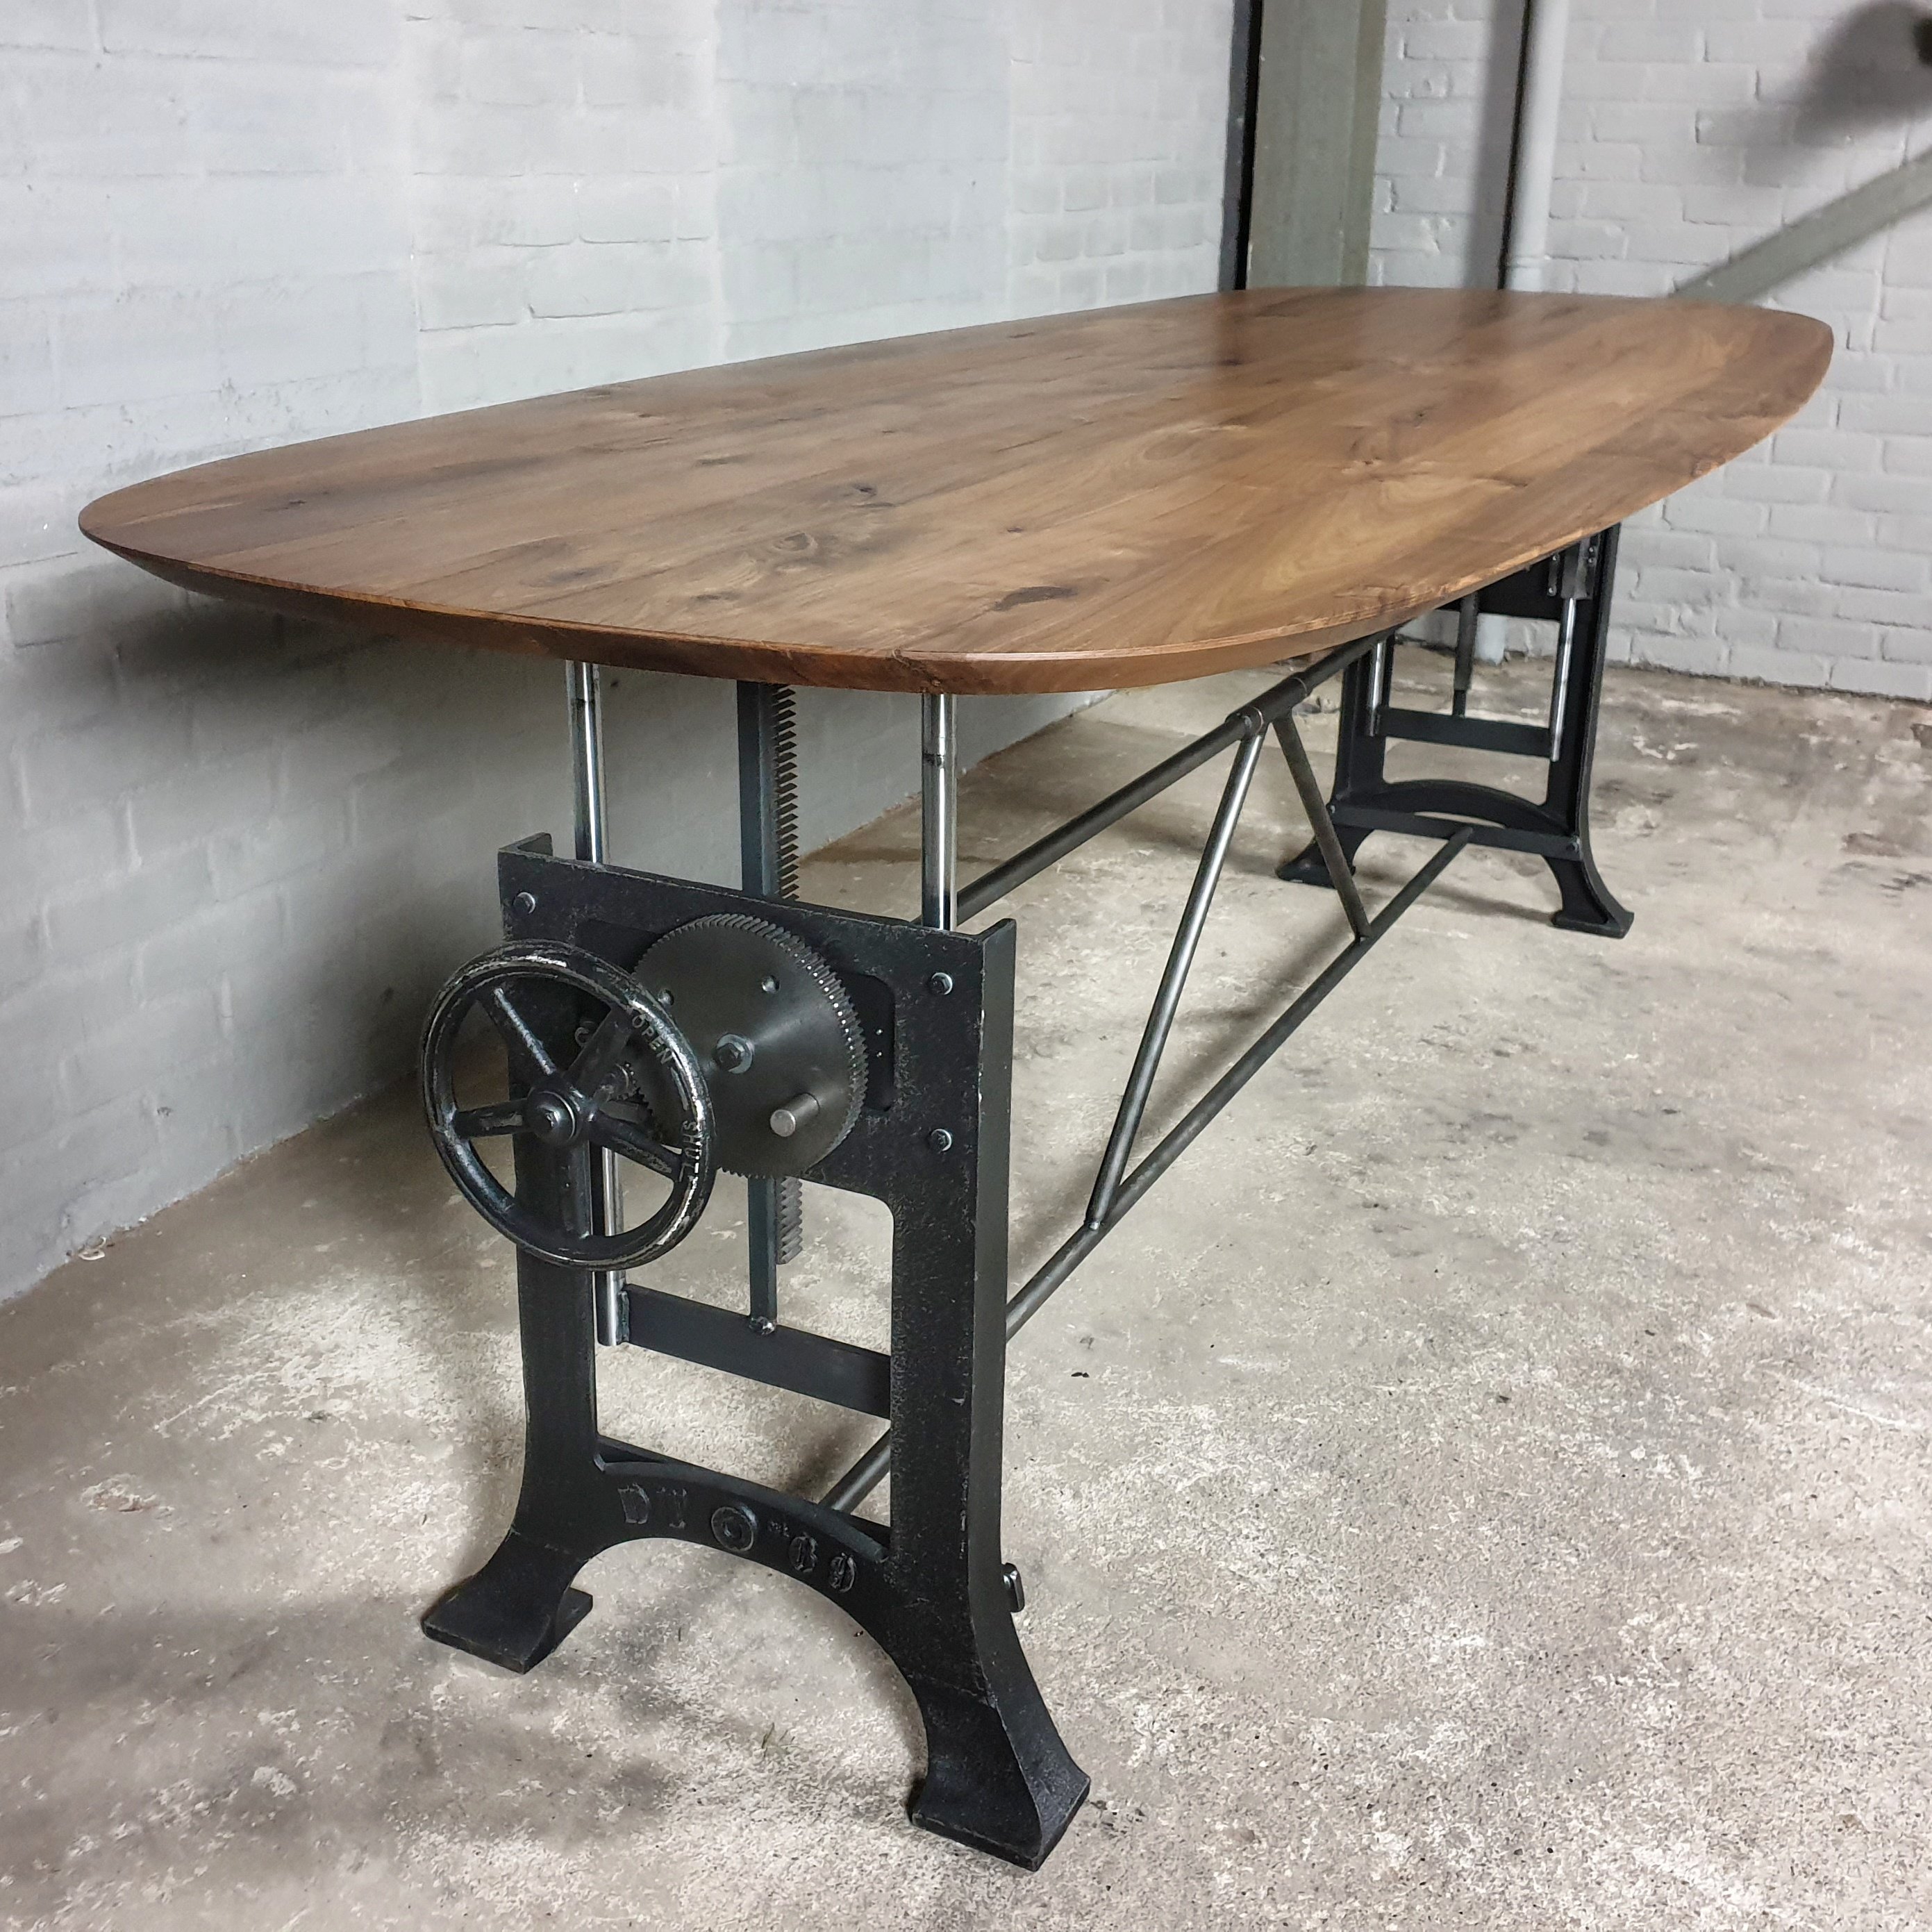 Adjustable in height crank table with an oval American black walnut top